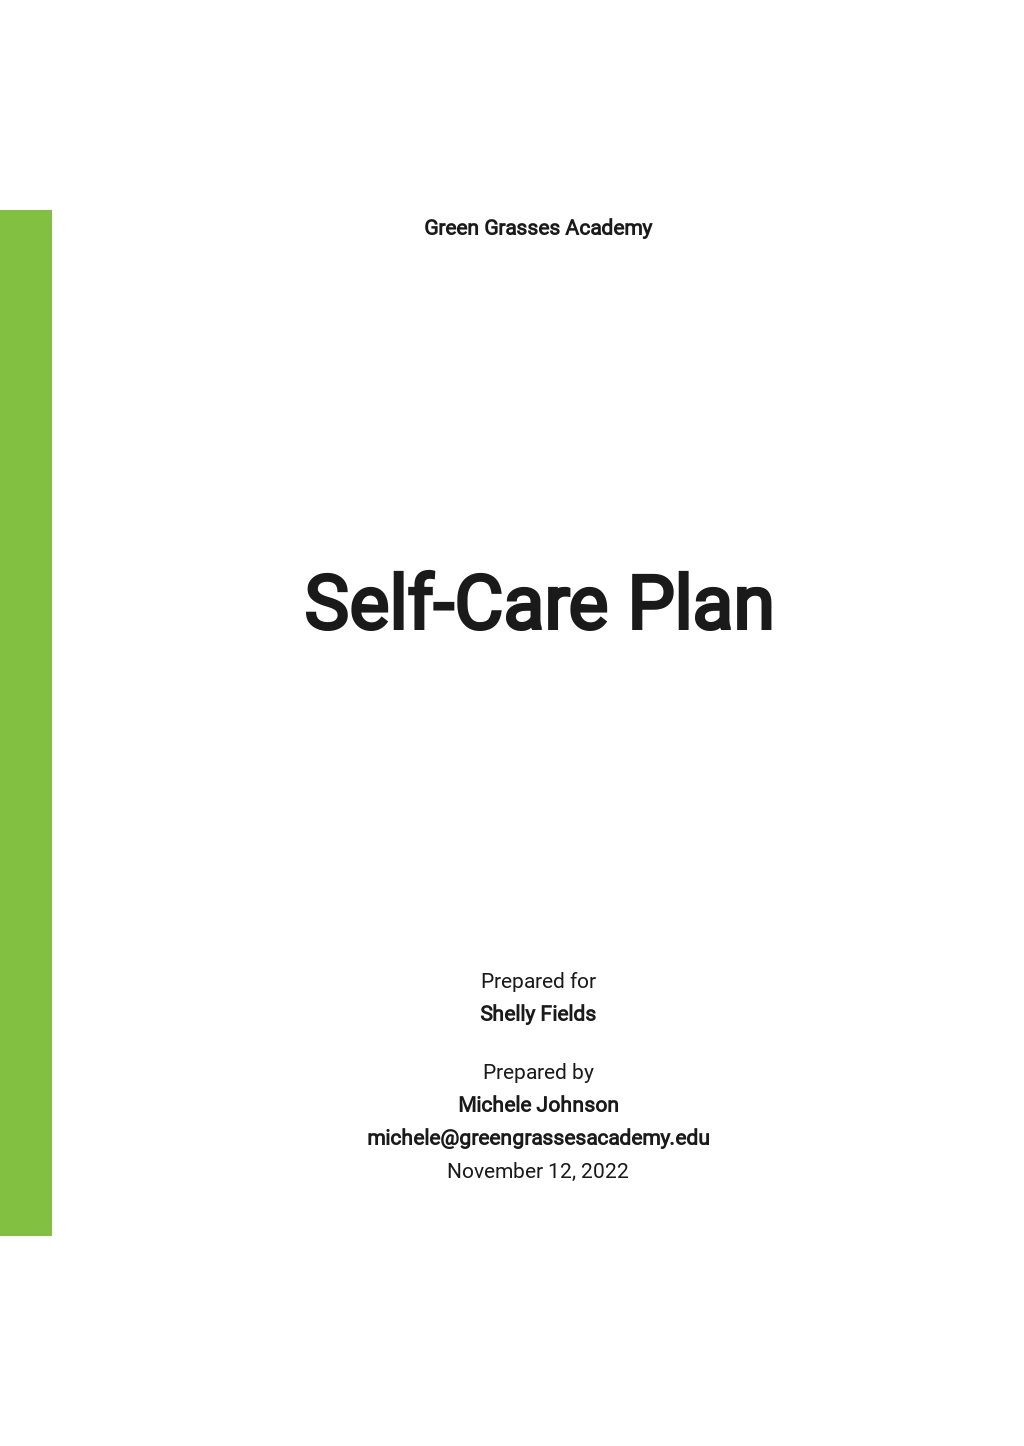 Self Care Plan Template For Students.jpe